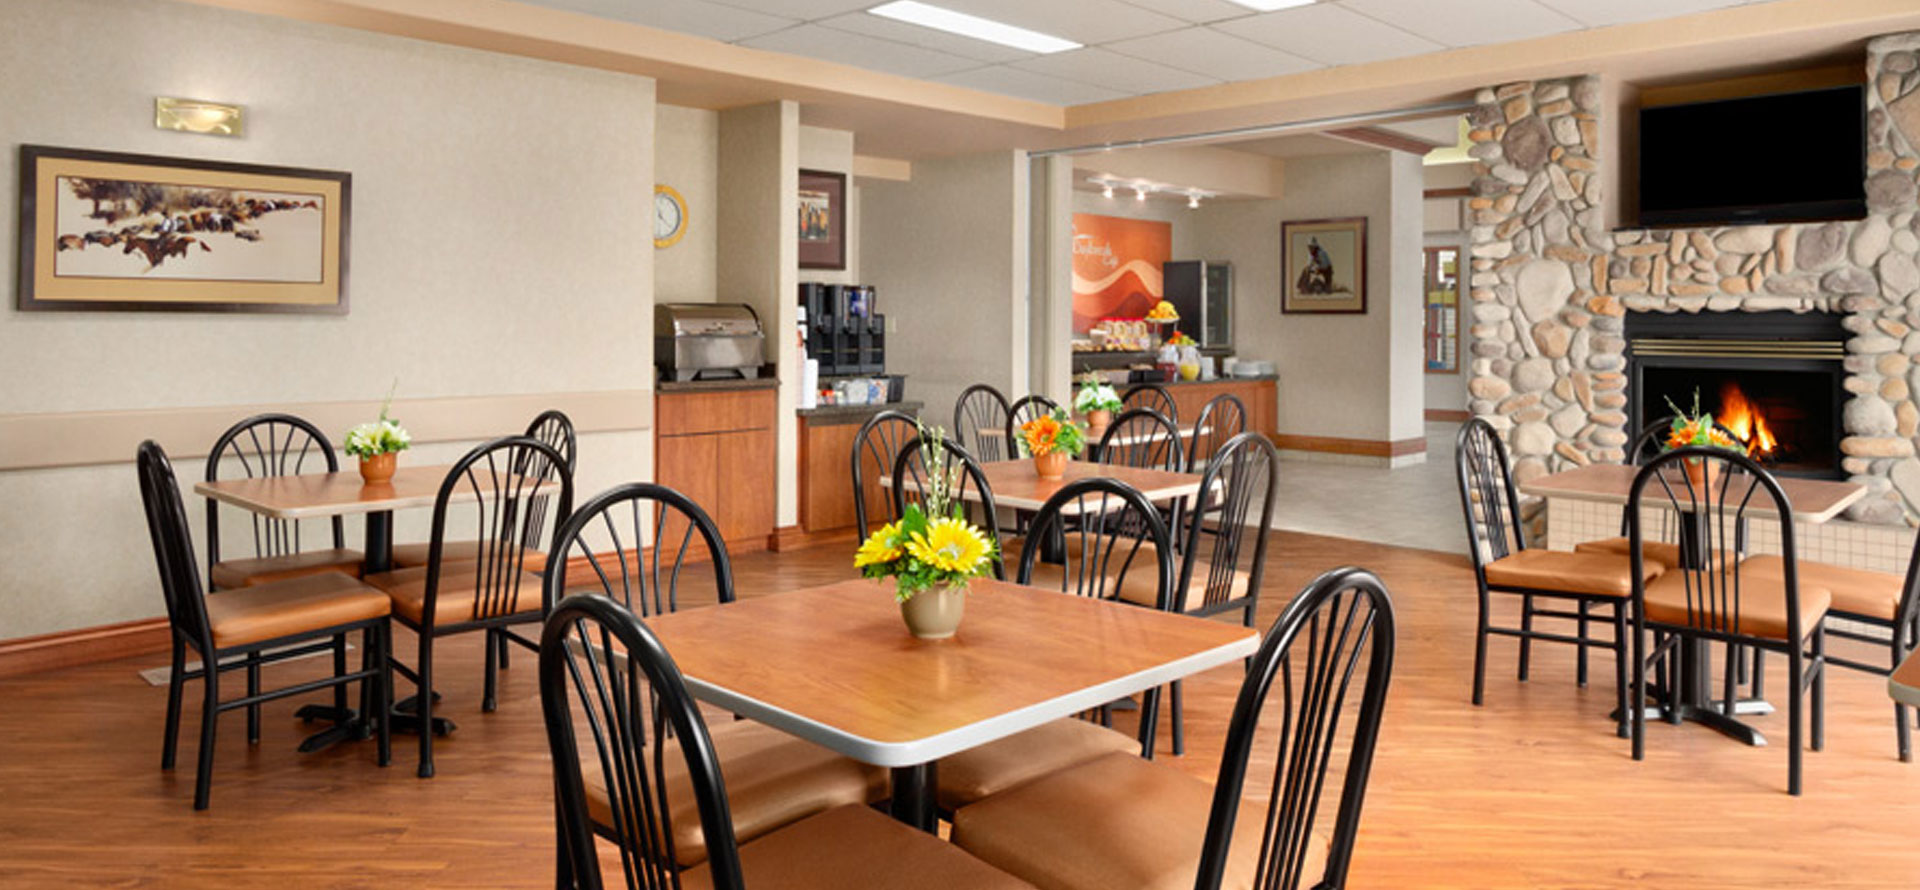 Large view of the sunny breakfast room at Days Inn Red Deer, Alberta with tables and bright fresh flowers and roaring fireplace.
